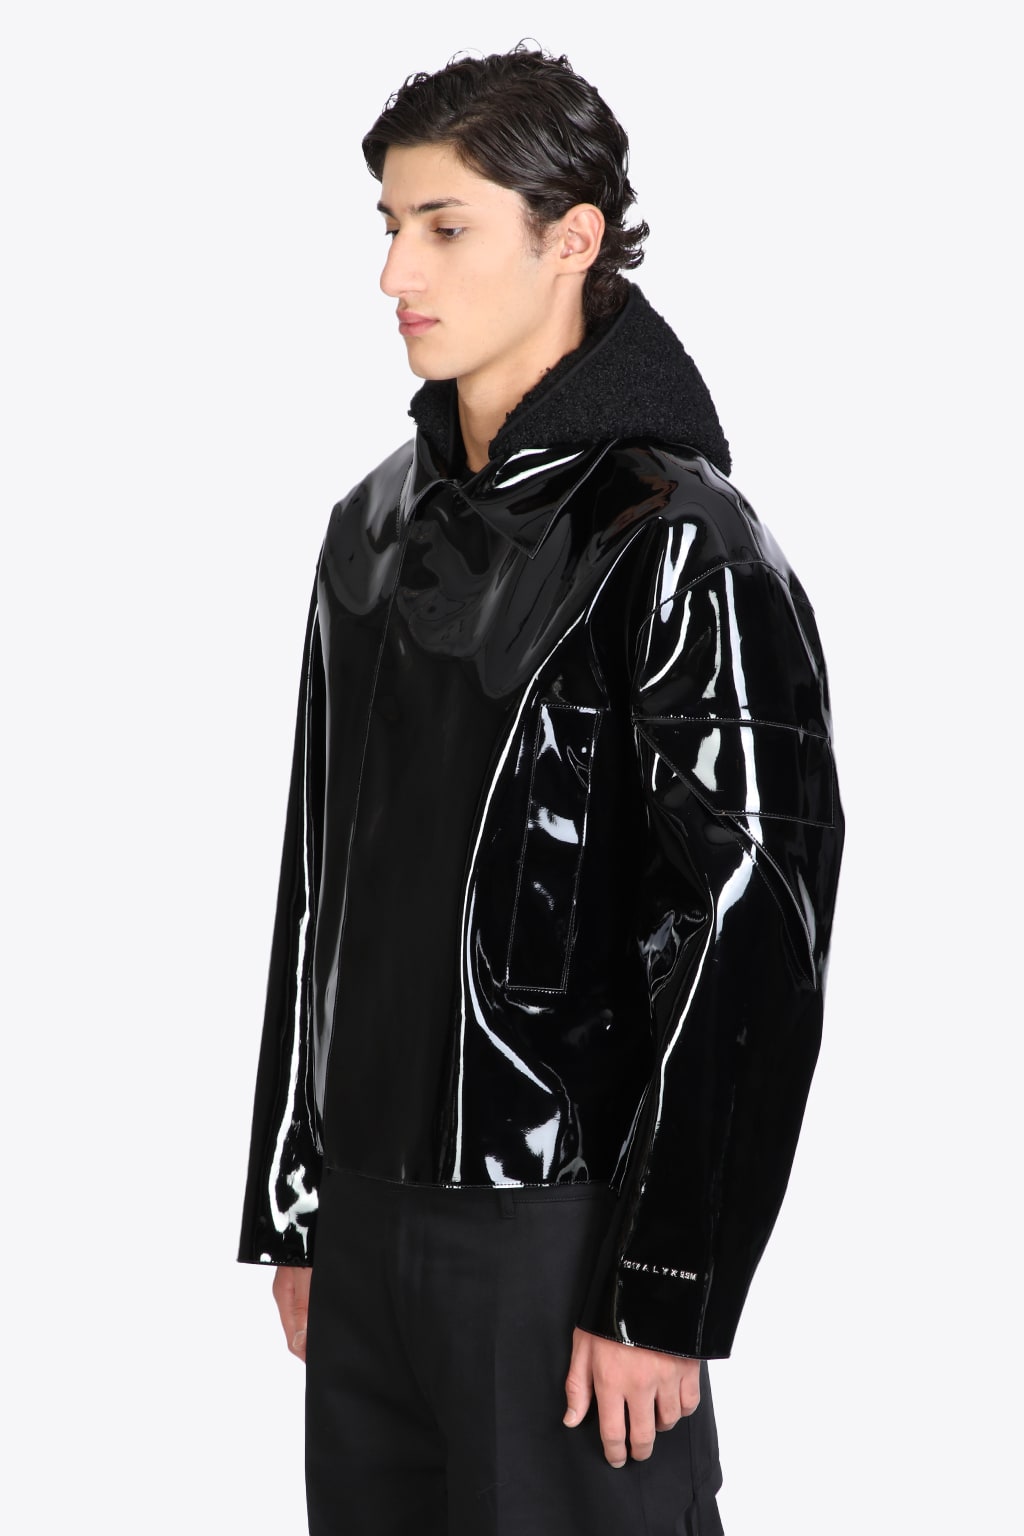 1017 ALYX 9SM Pvc Scout Jacket Black patent jacket with shearling